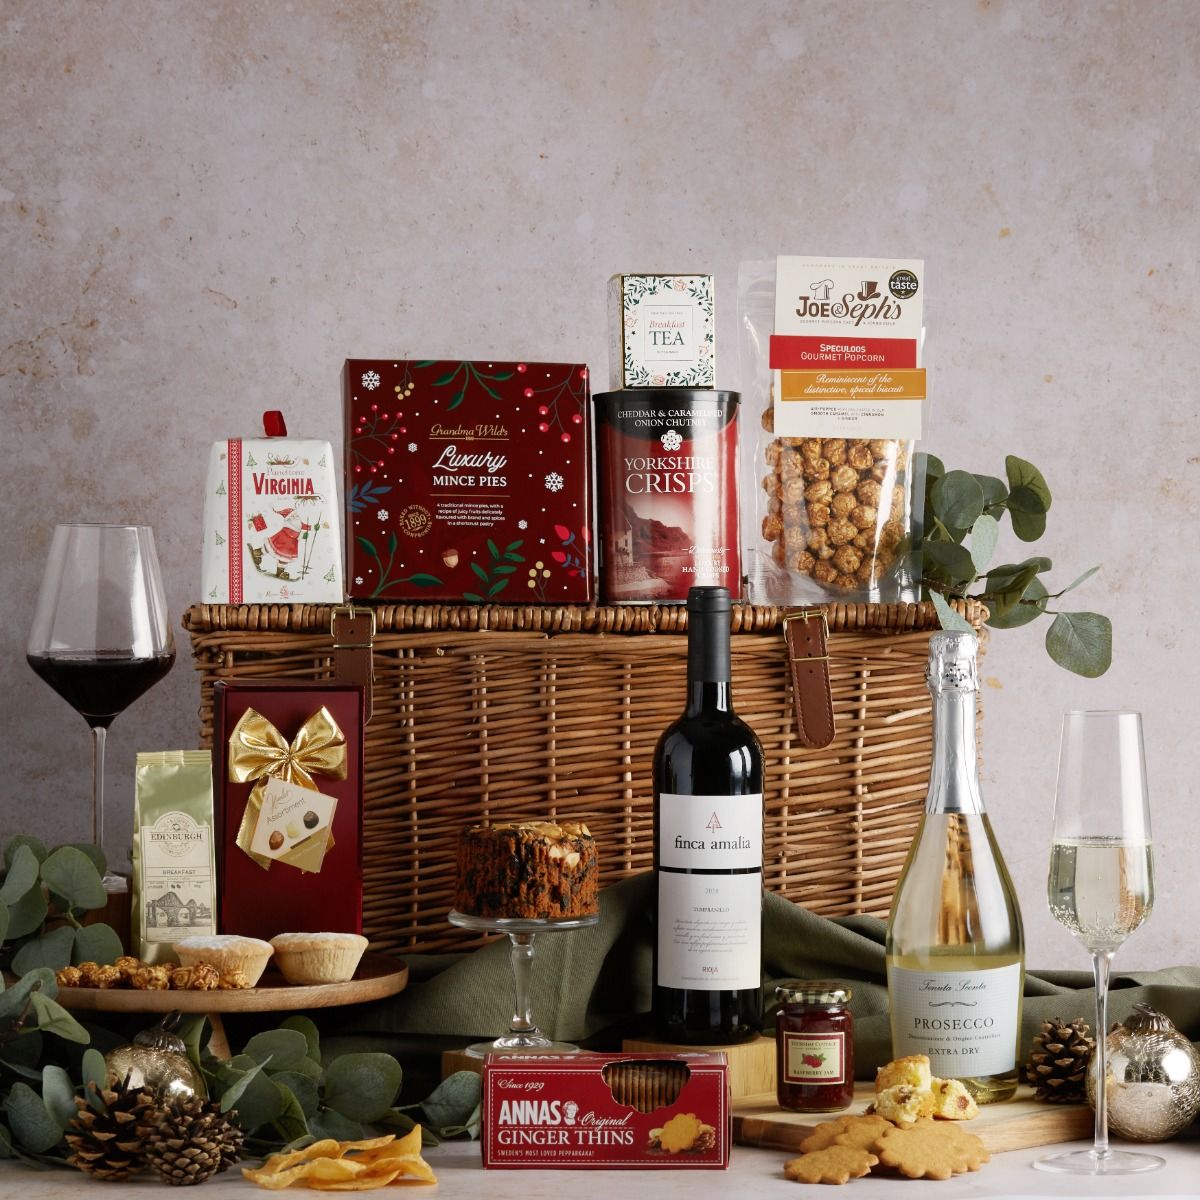 The Luxury Bearing Gifts Hamper with all of its products on display and wicker basket